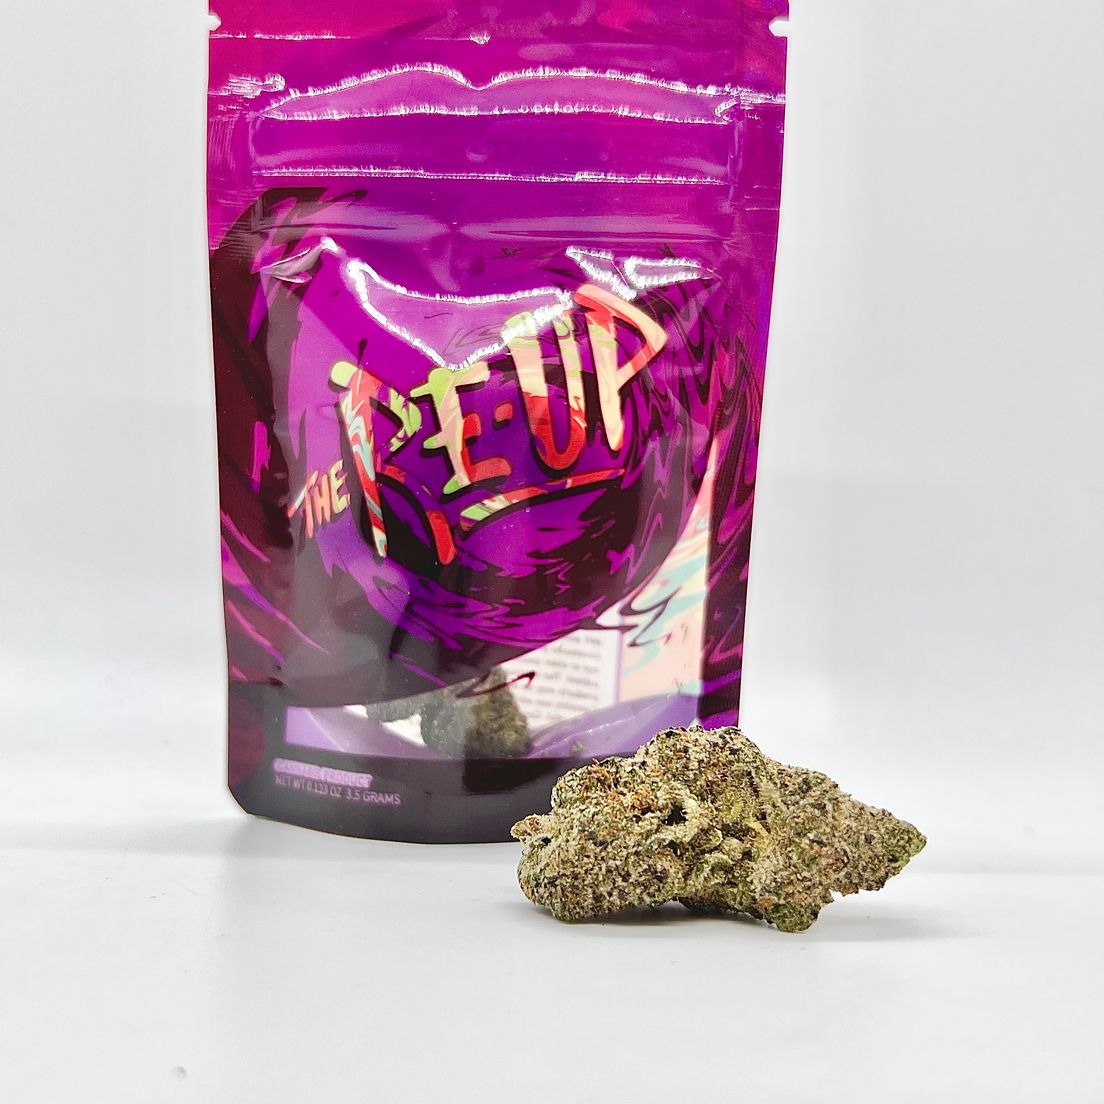 *BLOWOUT DEAL! $35 1/8 Purple Cake Batter (Indoor/31.02%/Hybrid - Indica Dom.) - The Re-Up